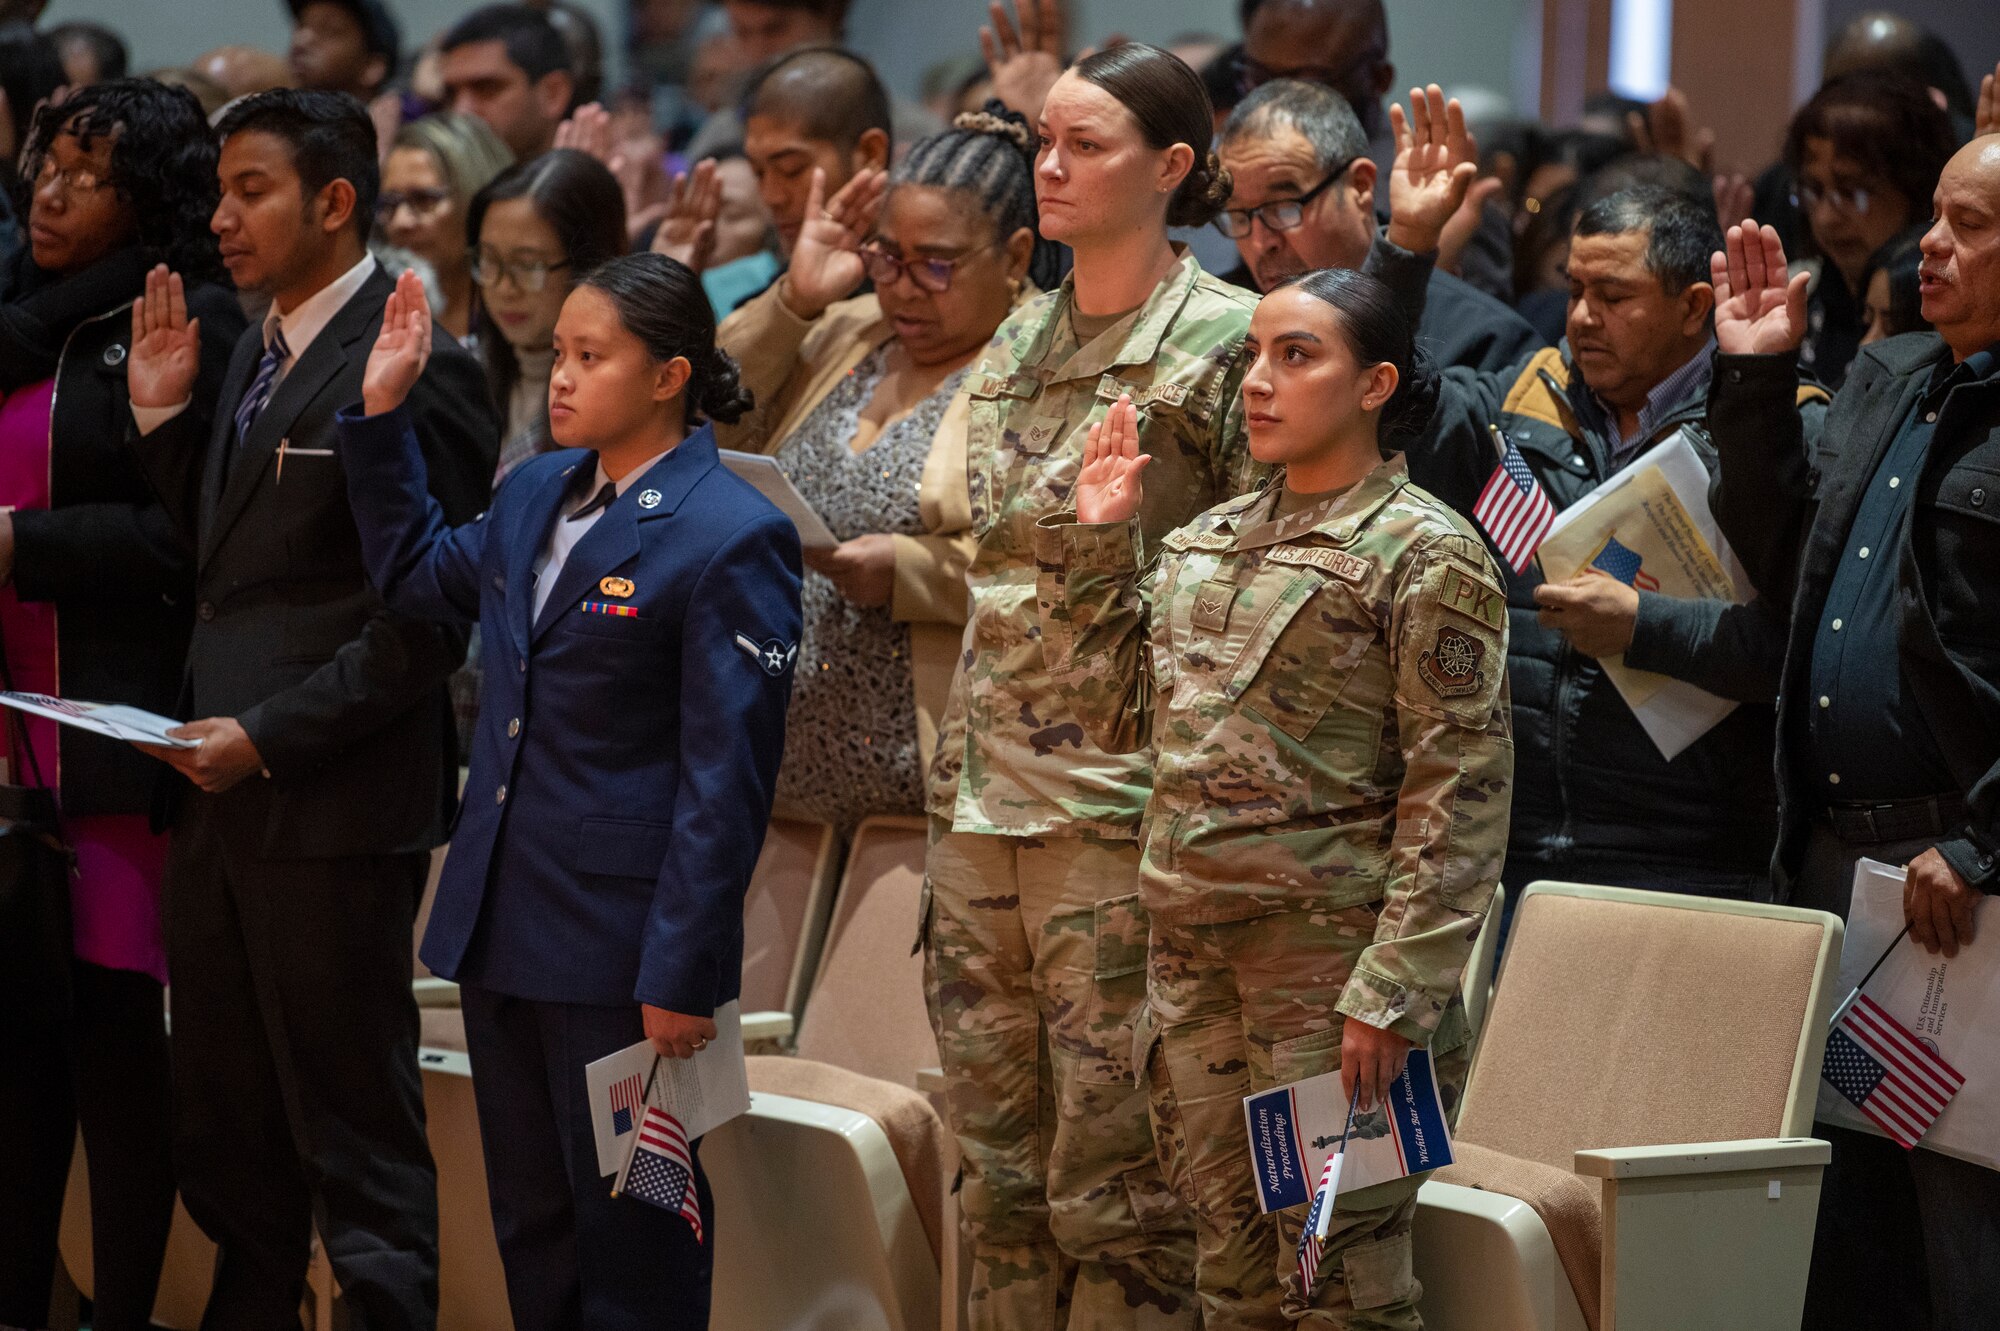 Airman Lissbeth Cardenas Idrovo, right, 22nd Contracting Squadron contracting specialist, performs the Oath of Allegiance at the Kansas Naturalization Ceremony Jan. 20, 2023, in Wichita, Kansas. She is accompanied by her supervisor, left, Staff Sgt. Cassandria McAfee. Airman Idrovo was one of two McConnell Airmen to become a U.S. Citizen that day, along with Airman Michelle Ashley, far left and in her blue service dress uniform. Airman Ashley is a full-time member of the Kansas Air National Guard's 184th Comptroller Flight at McConnell. During the ceremony 165 people from 46 countries became U.S. citizens. (U.S. Air Force photo by Airman 1st Class Brenden Beezley)